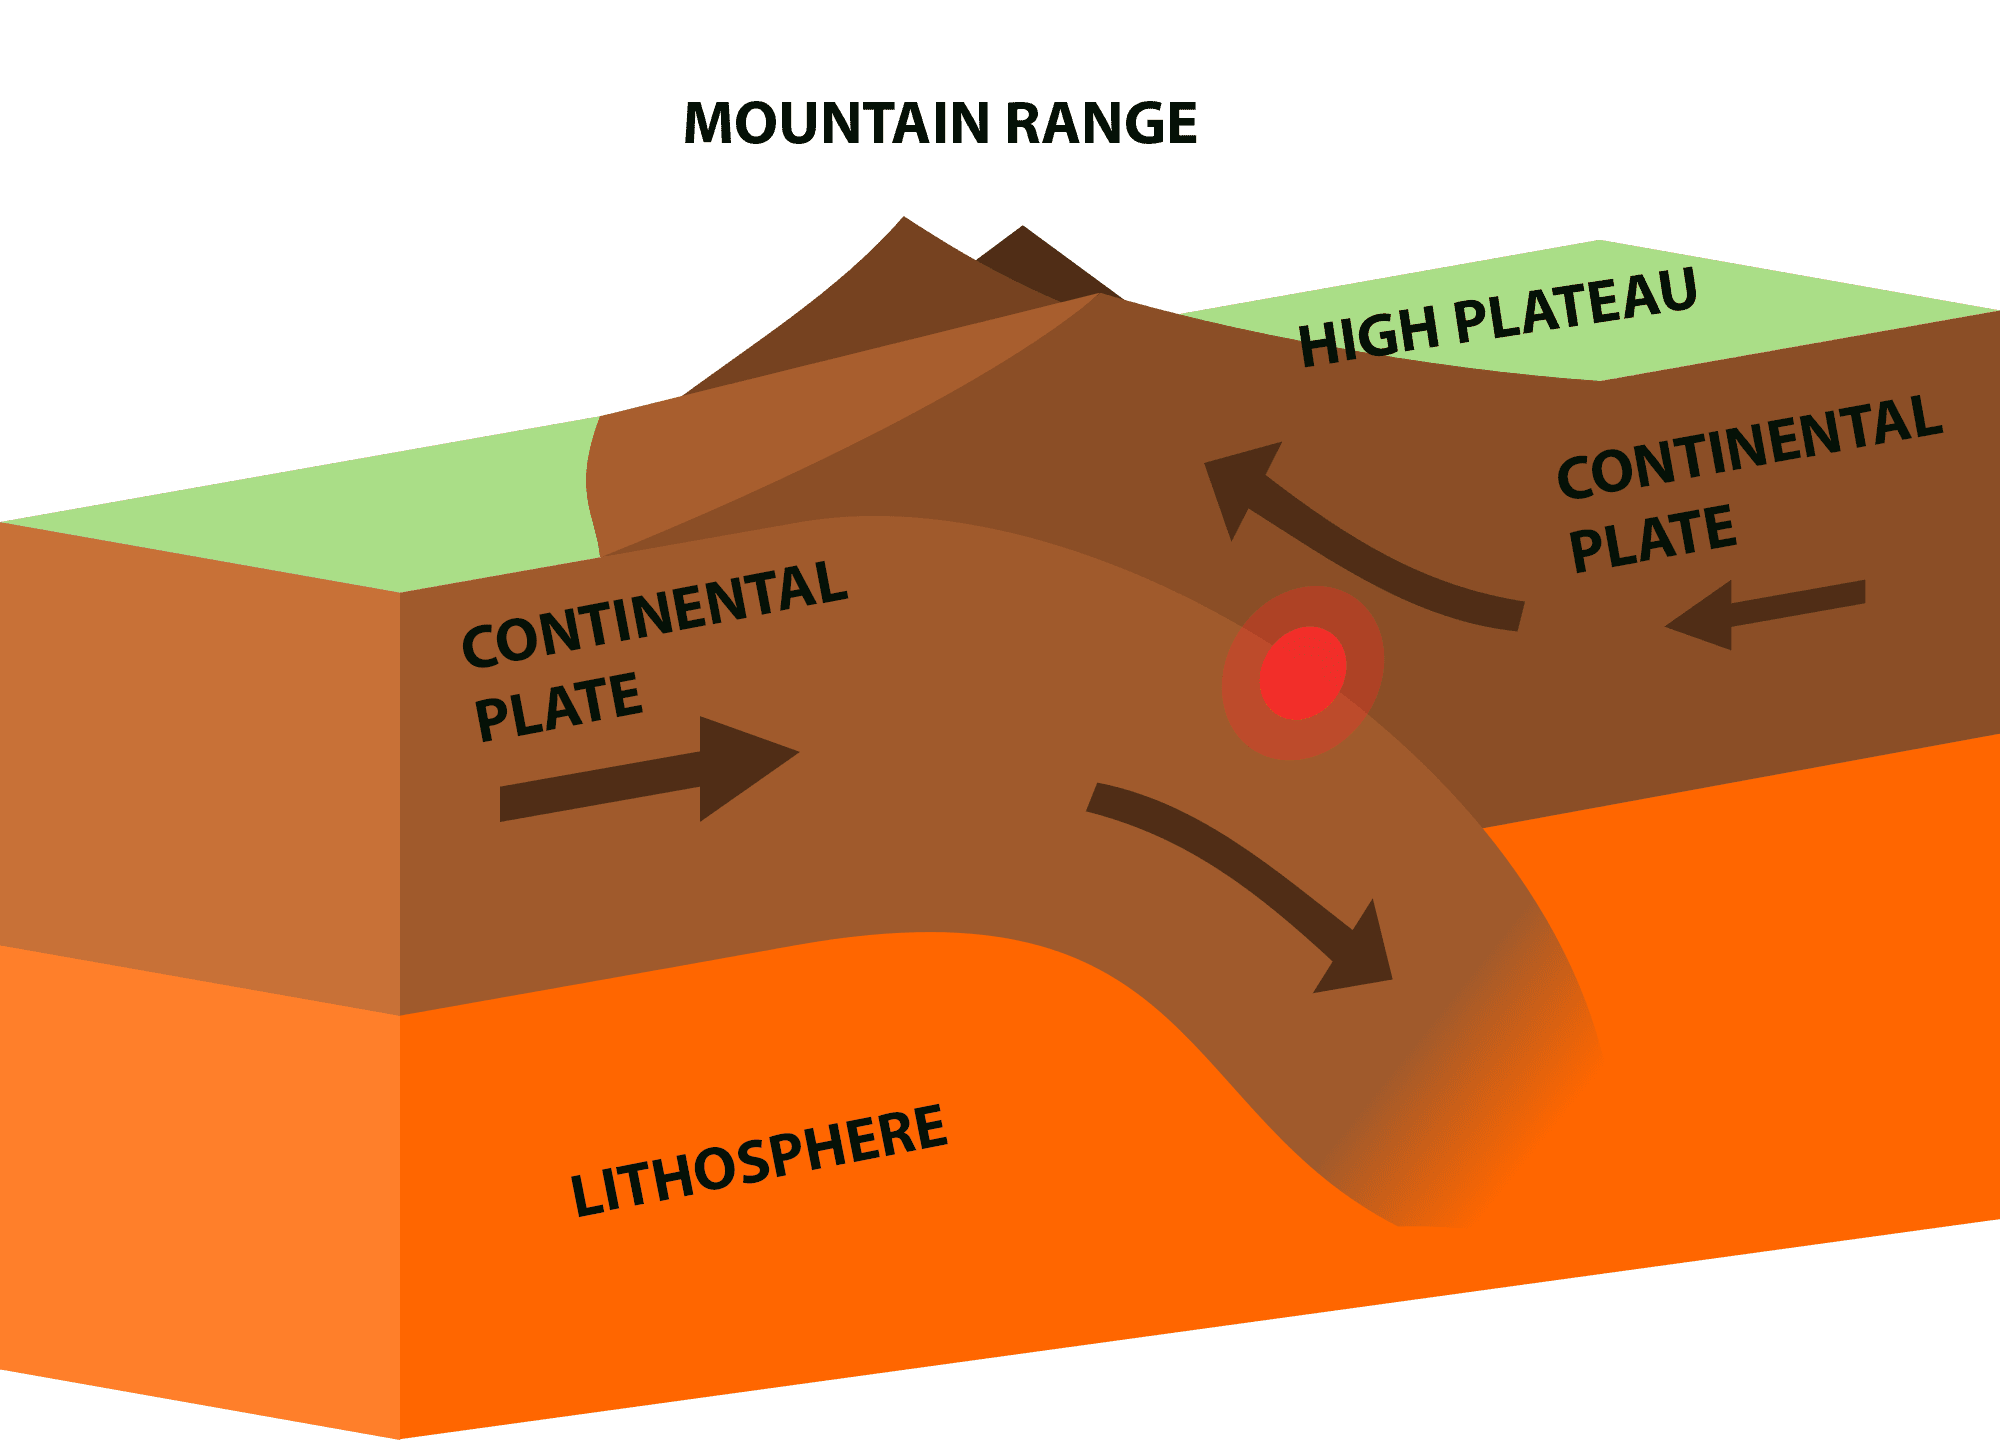 Two continental plates converging